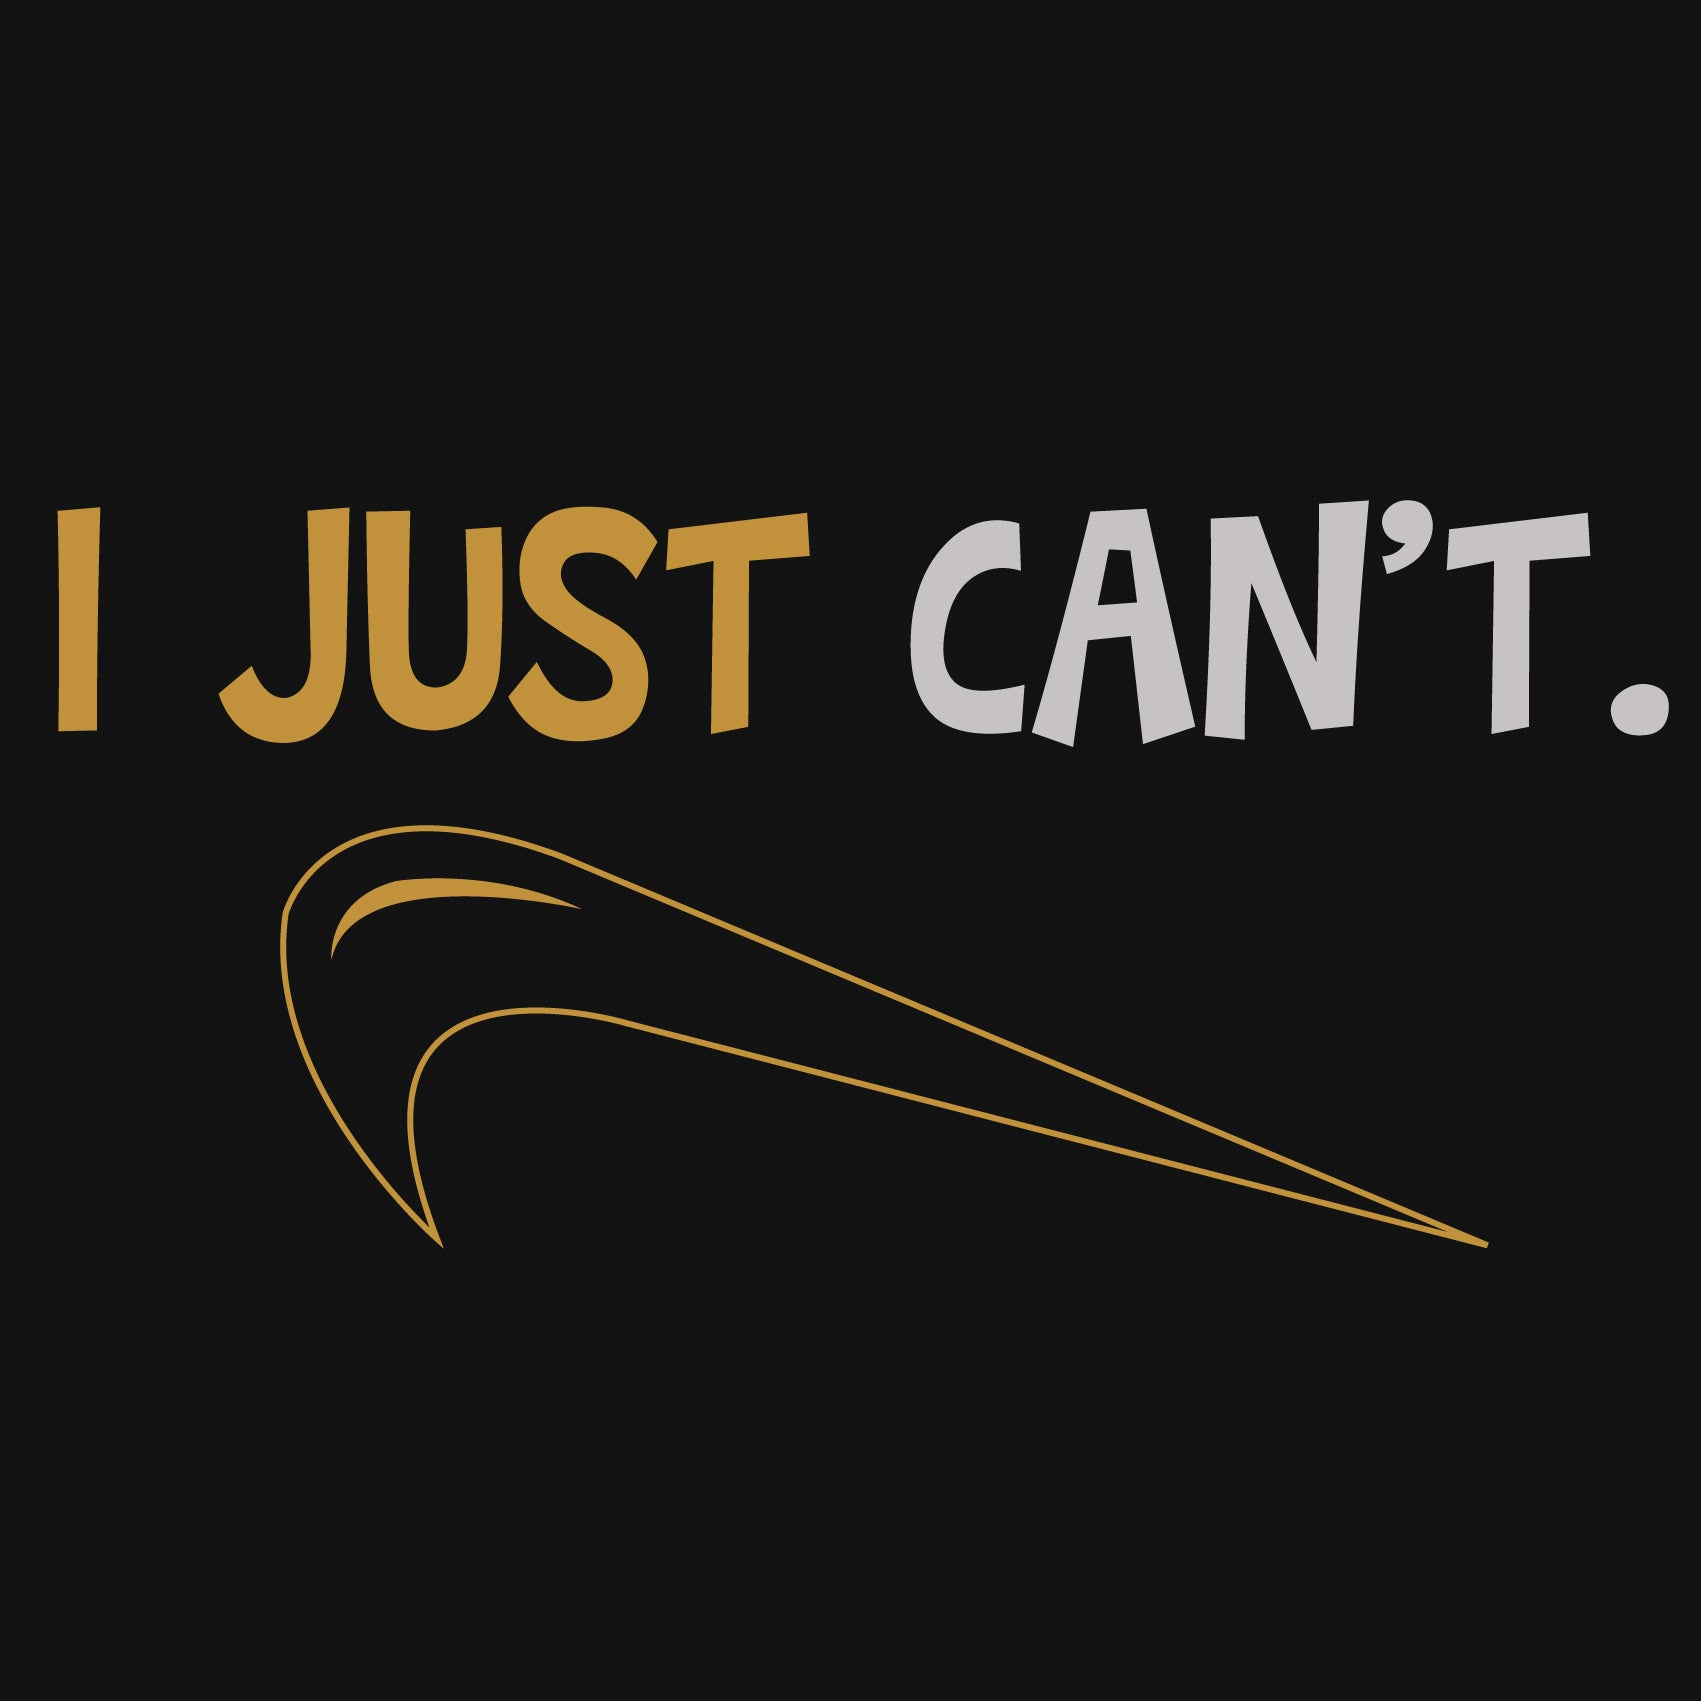 I Just Can't Reactr Tshirts For Men - Eyewearlabs